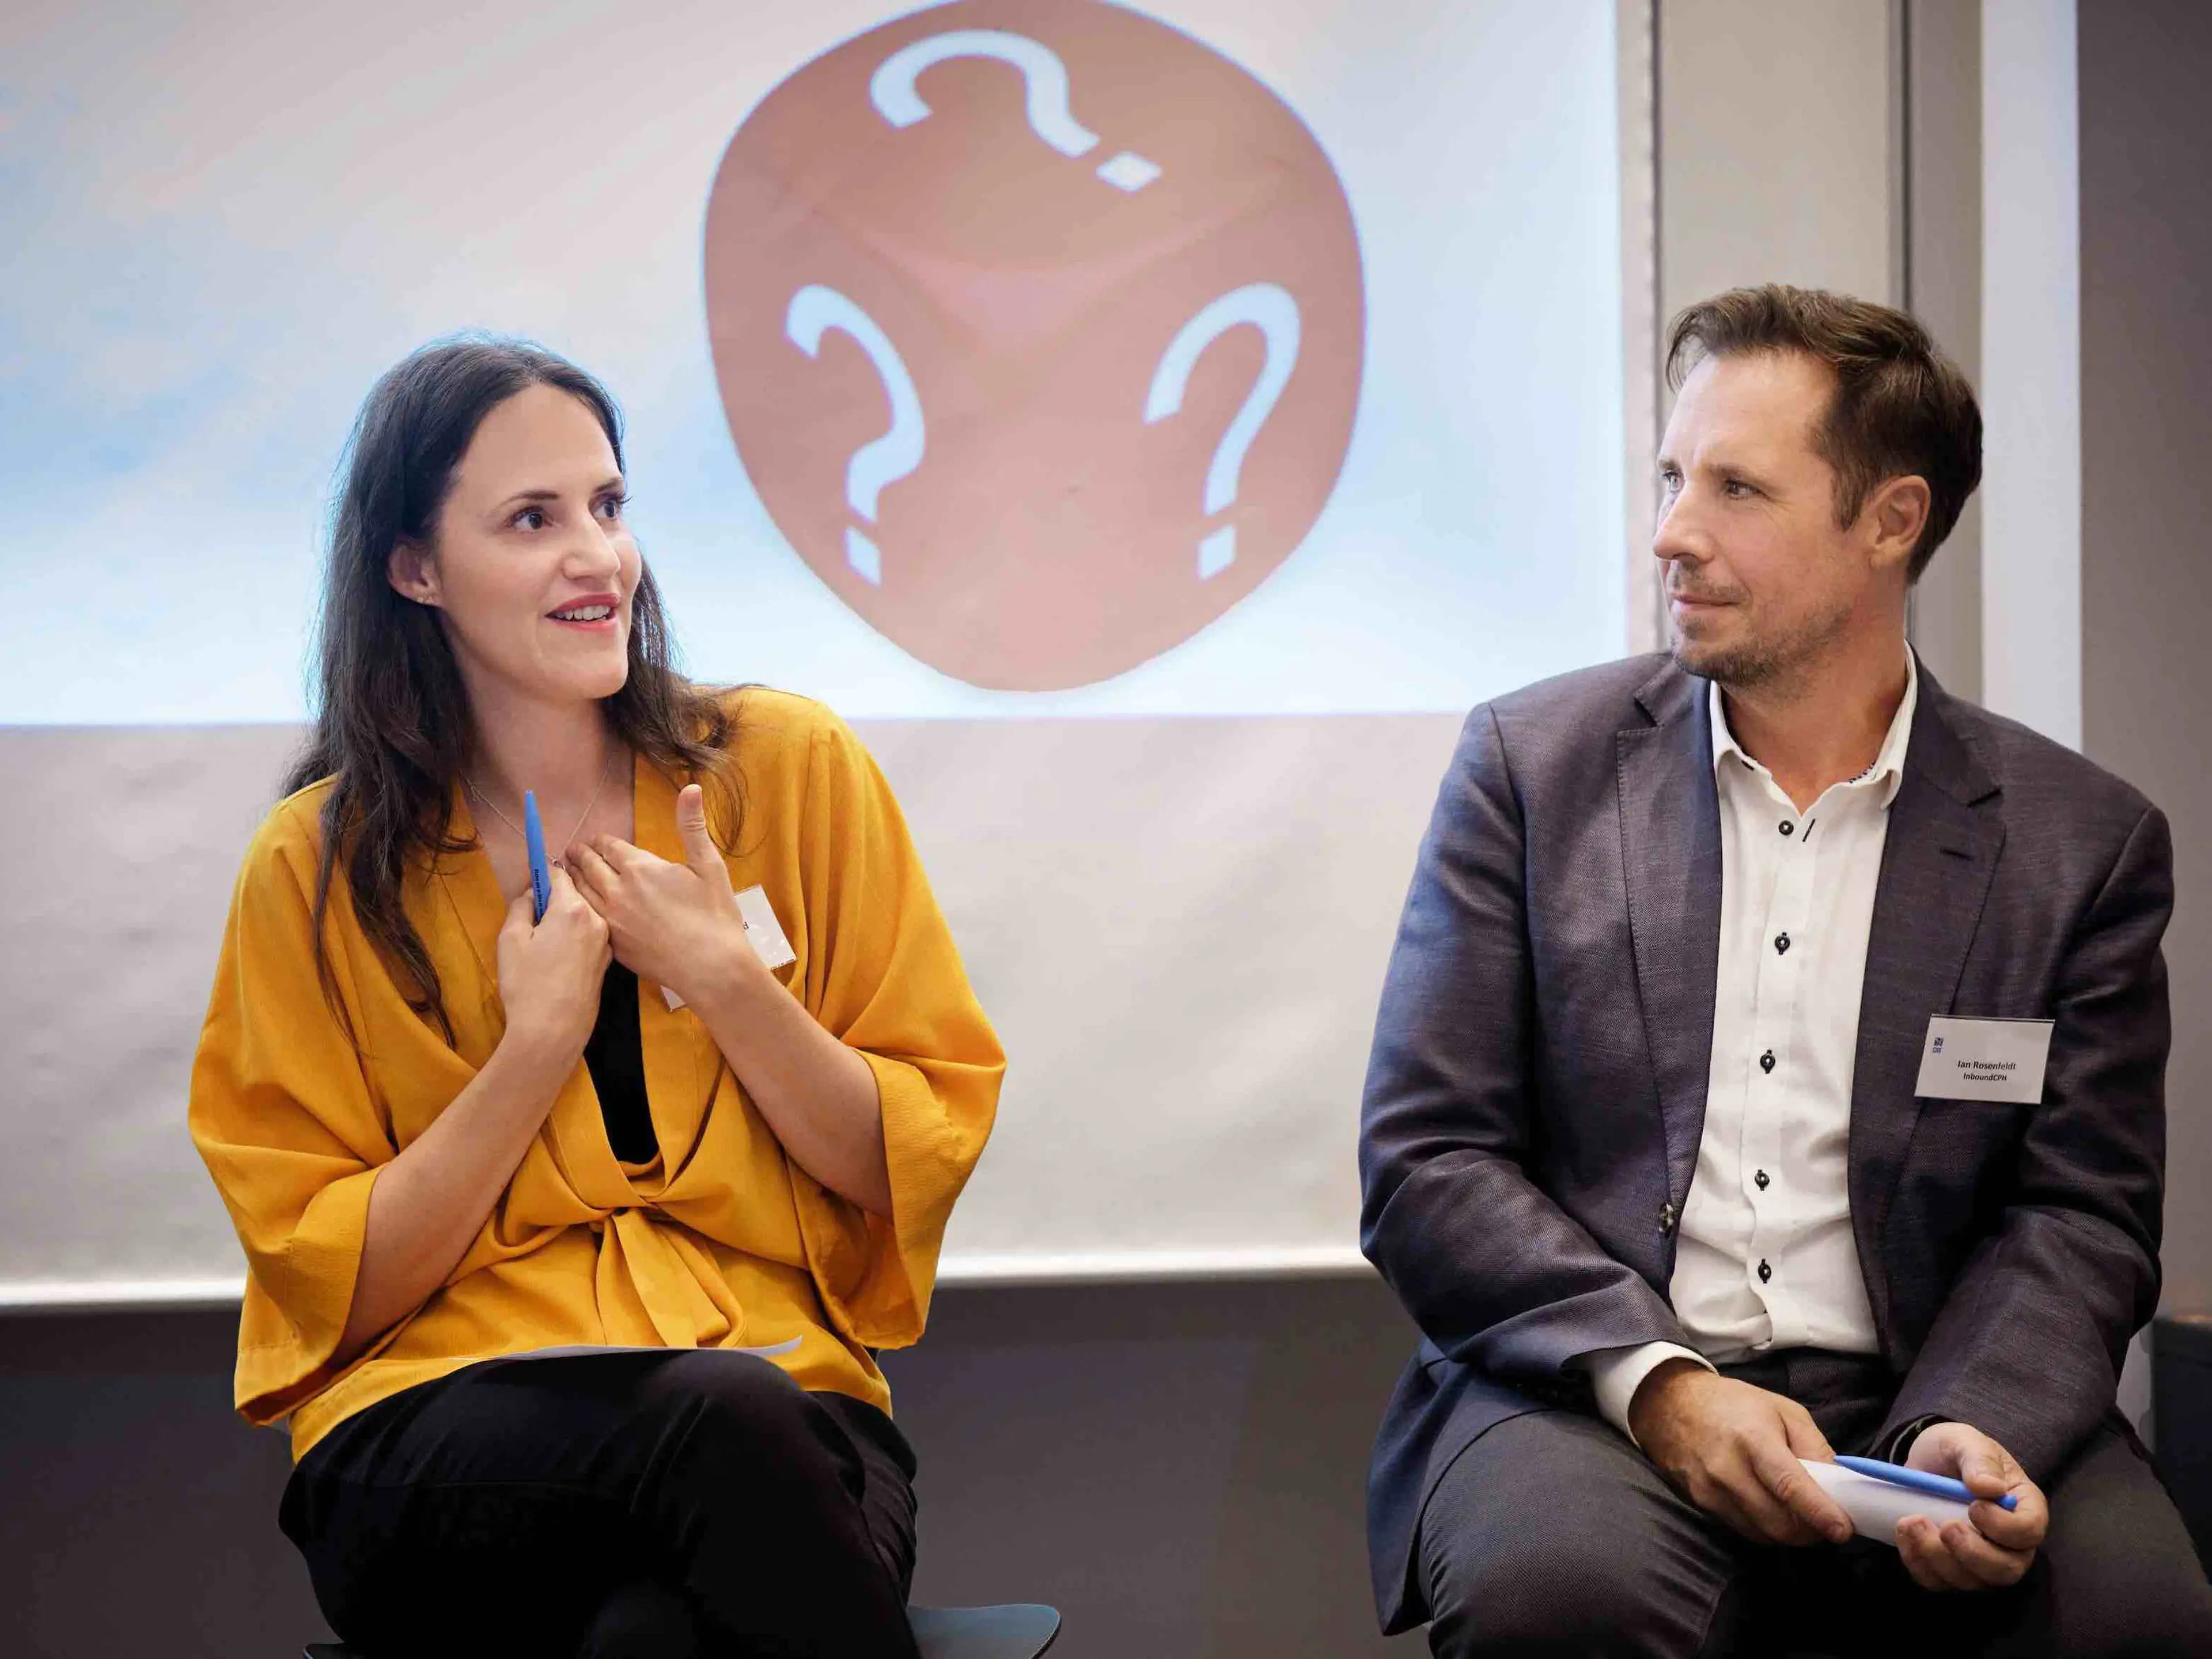 Two speakers of the CBS Developing an AI-agile mindset event: Sanne Thougaard and Ian Rosenfeldt